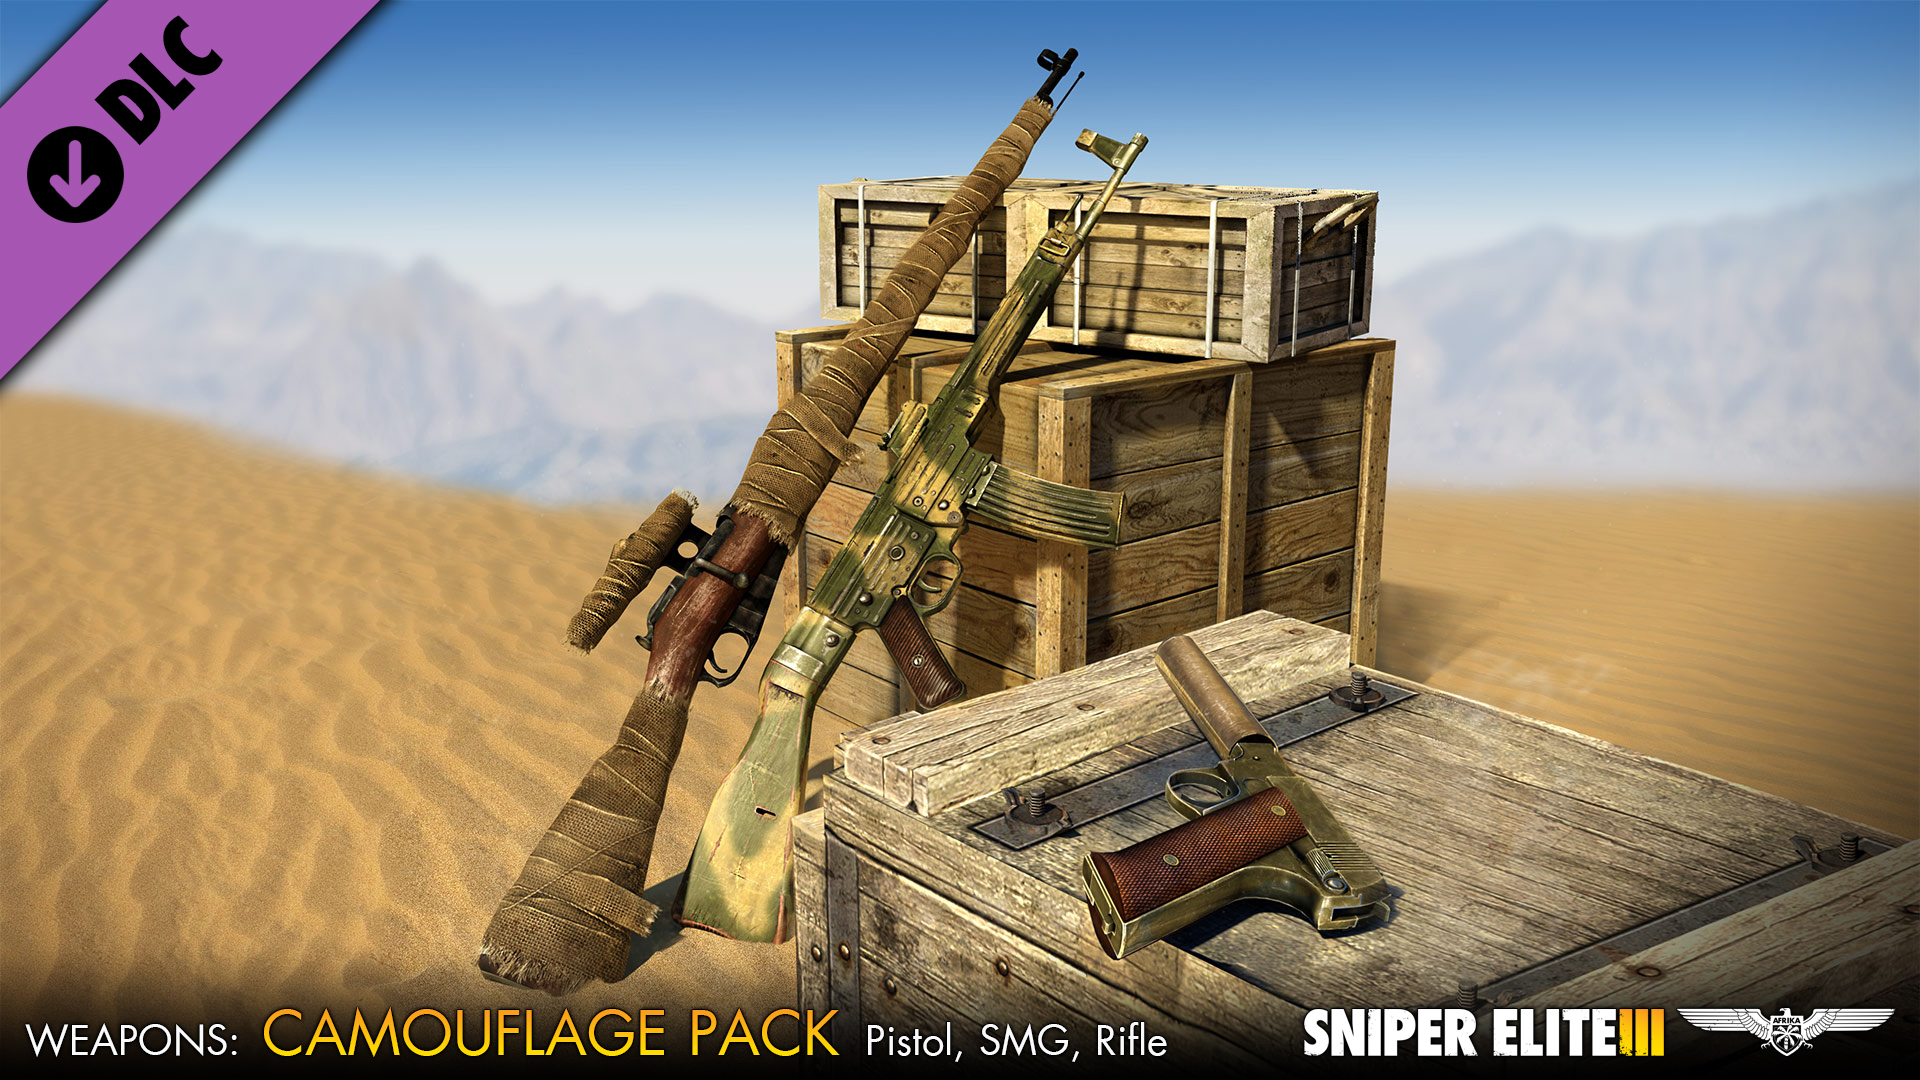 Sniper Elite 3 - Camouflage Weapons Pack Featured Screenshot #1